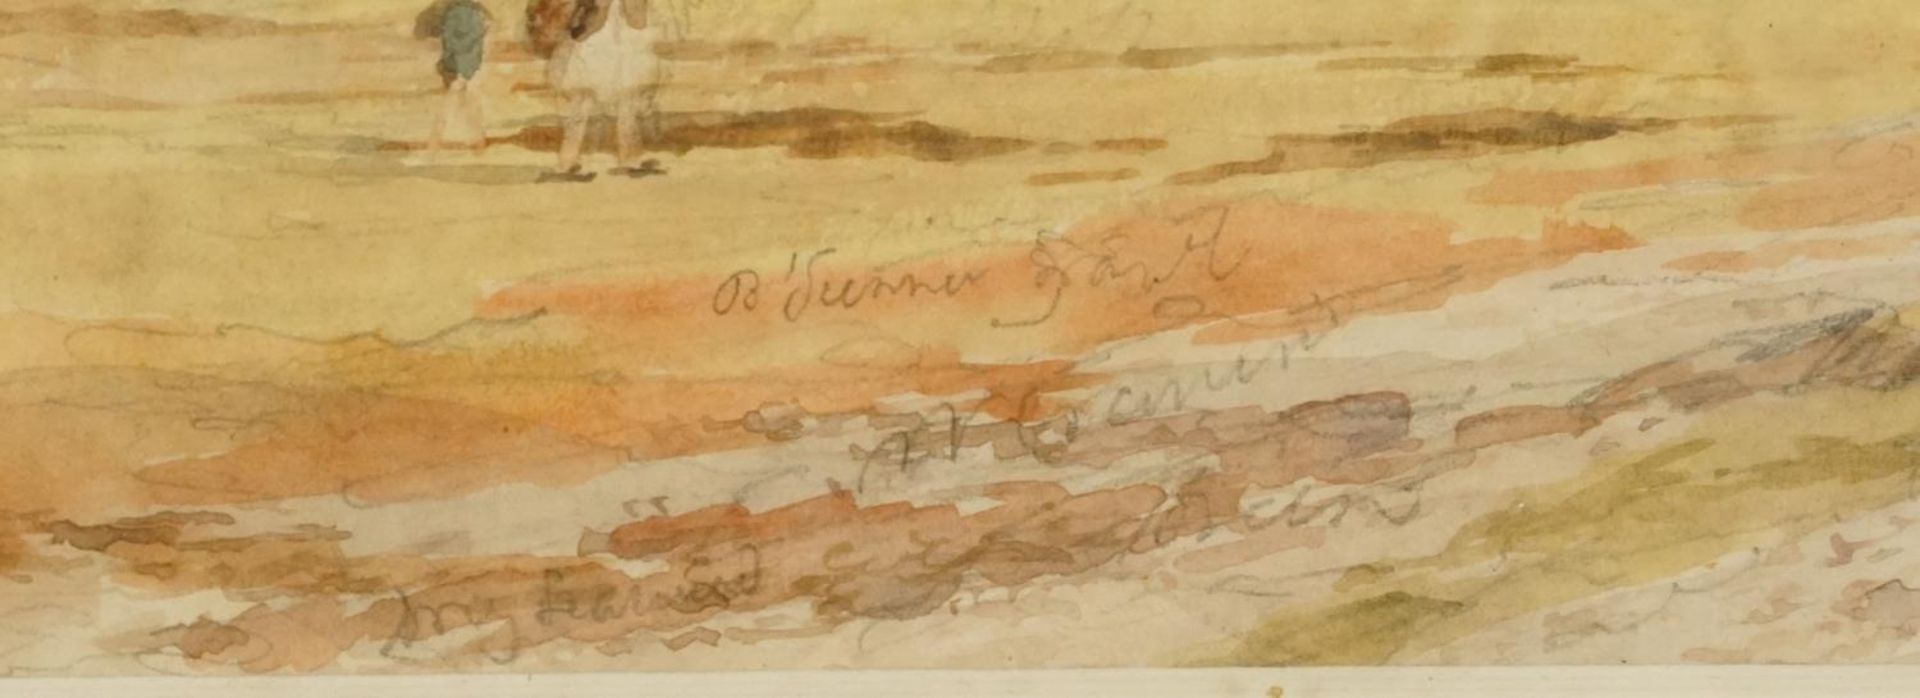 Coastal landscape with figures before boats, watercolour with pencil annotations, London stamp - Image 3 of 6